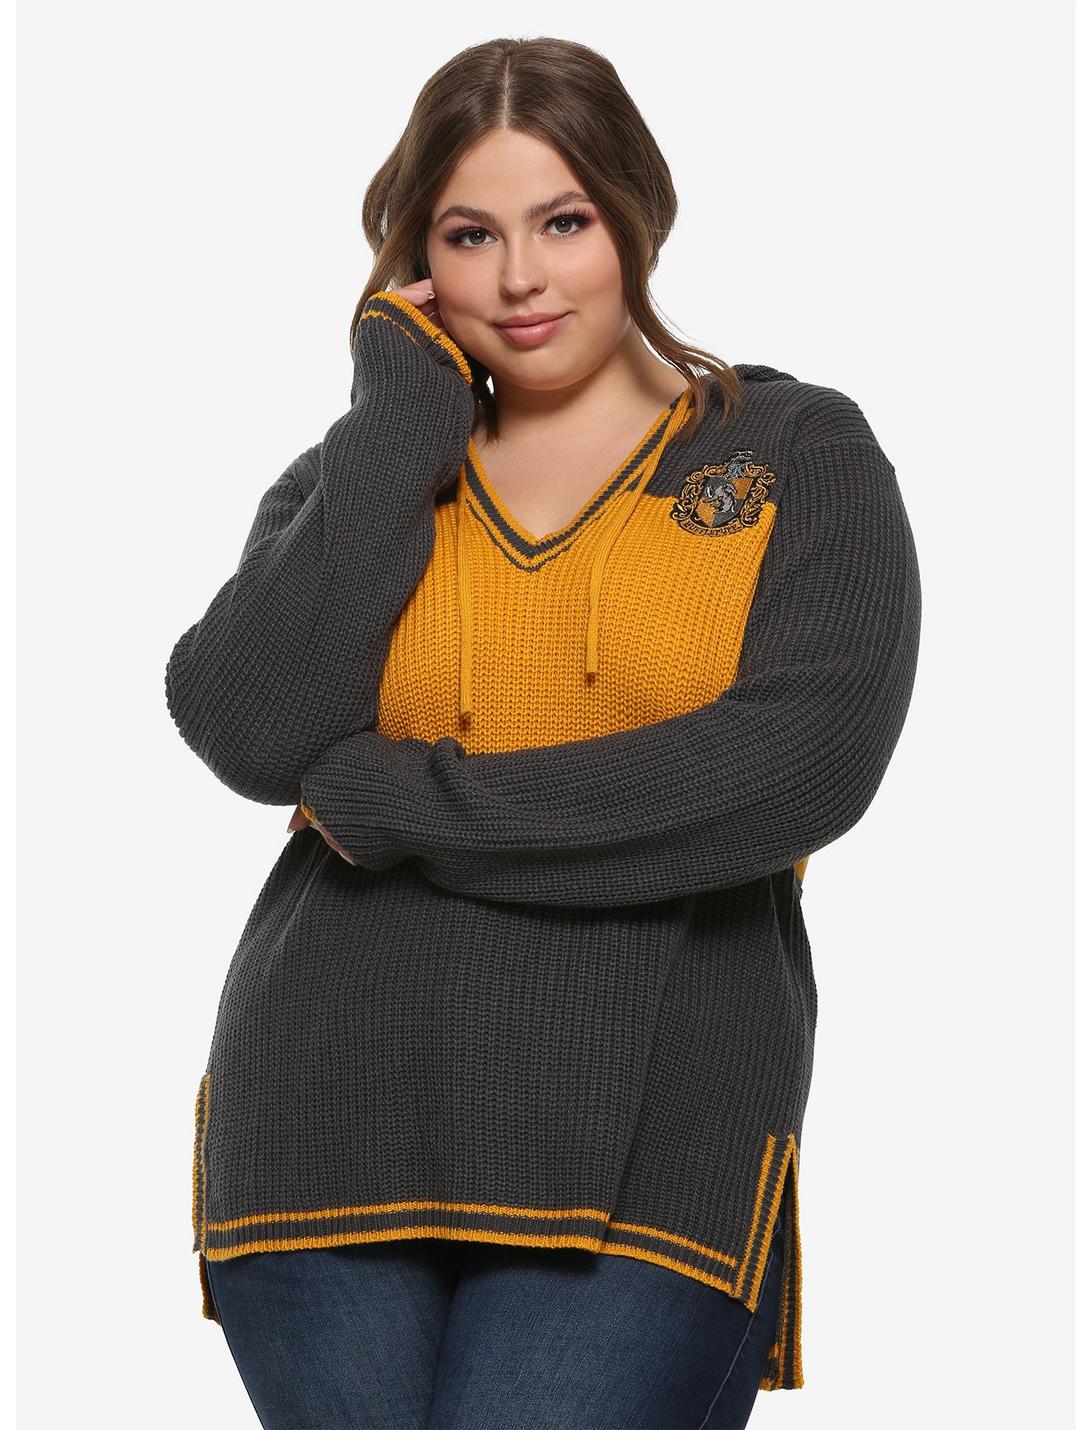 Harry Potter Hufflepuff Girls Hooded Sweater Plus Size, YELLOW, hi-res